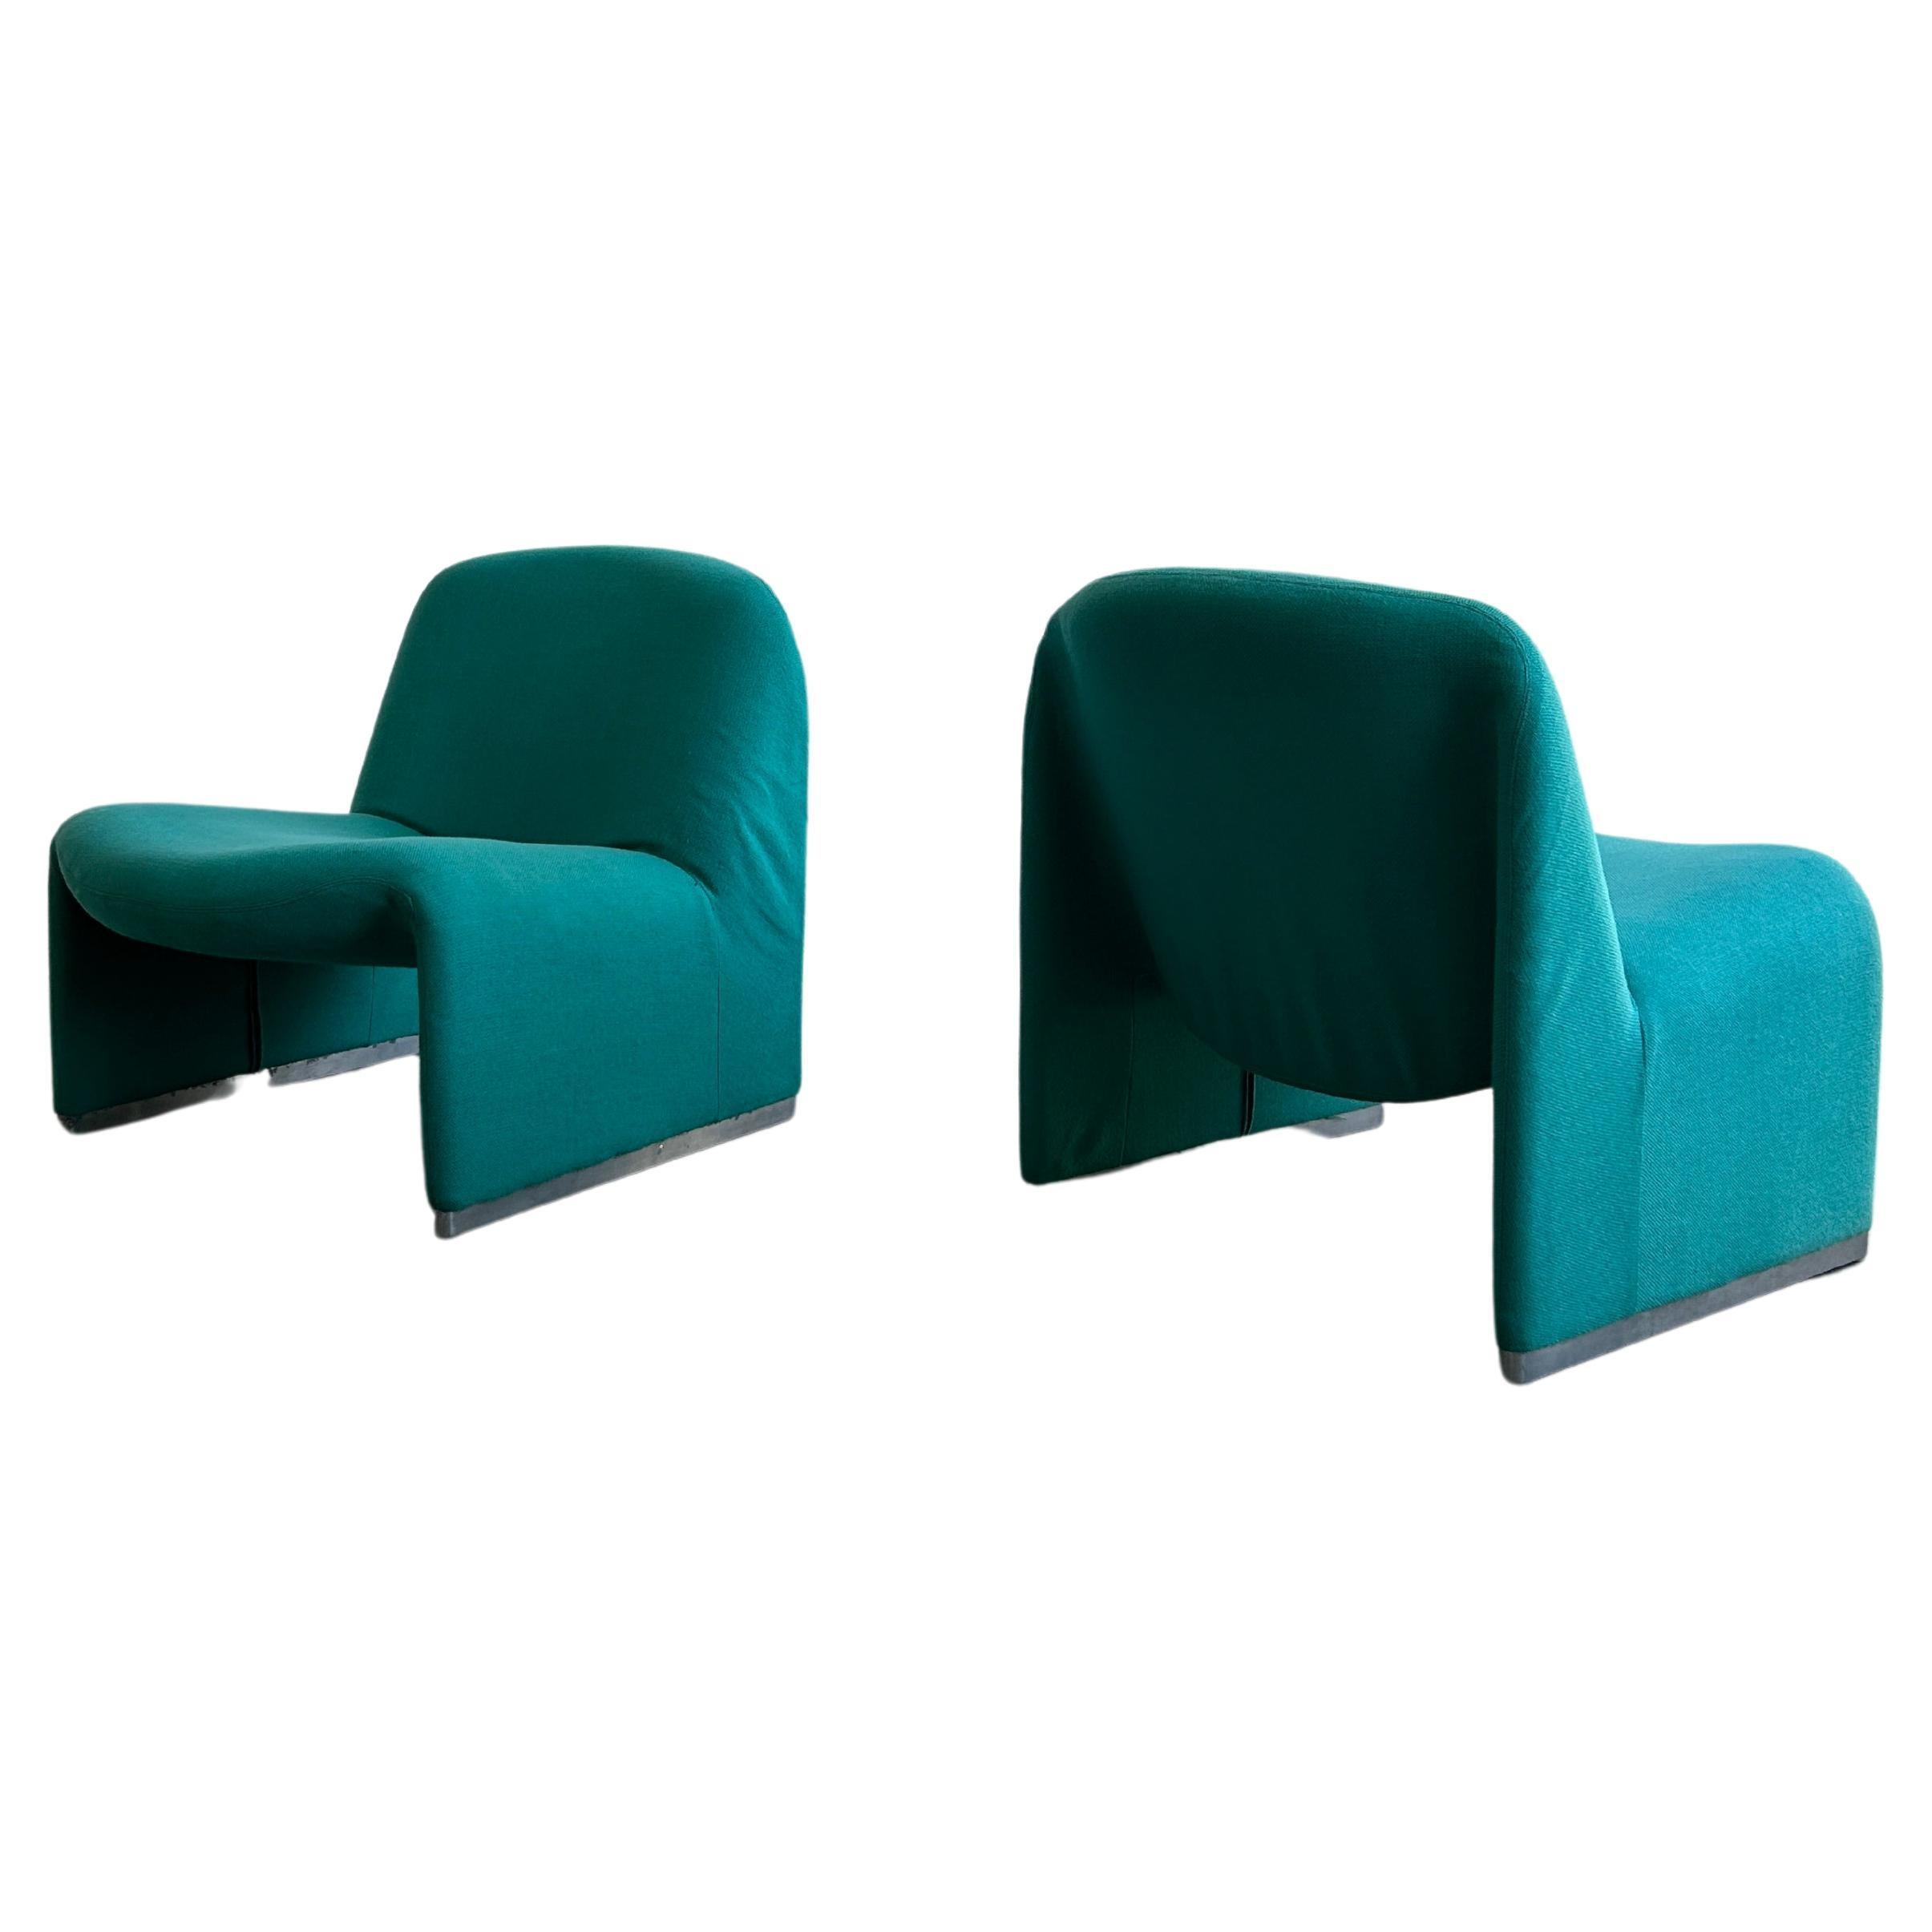 A pair of the iconic Alky chairs, designed by Giancarlo Piretti for Anonima Castelli. Produced in the late 1970s in Italy.
Iconic Italian design.

Overall very well preserved and in very good vintage condition with expected signs of age and